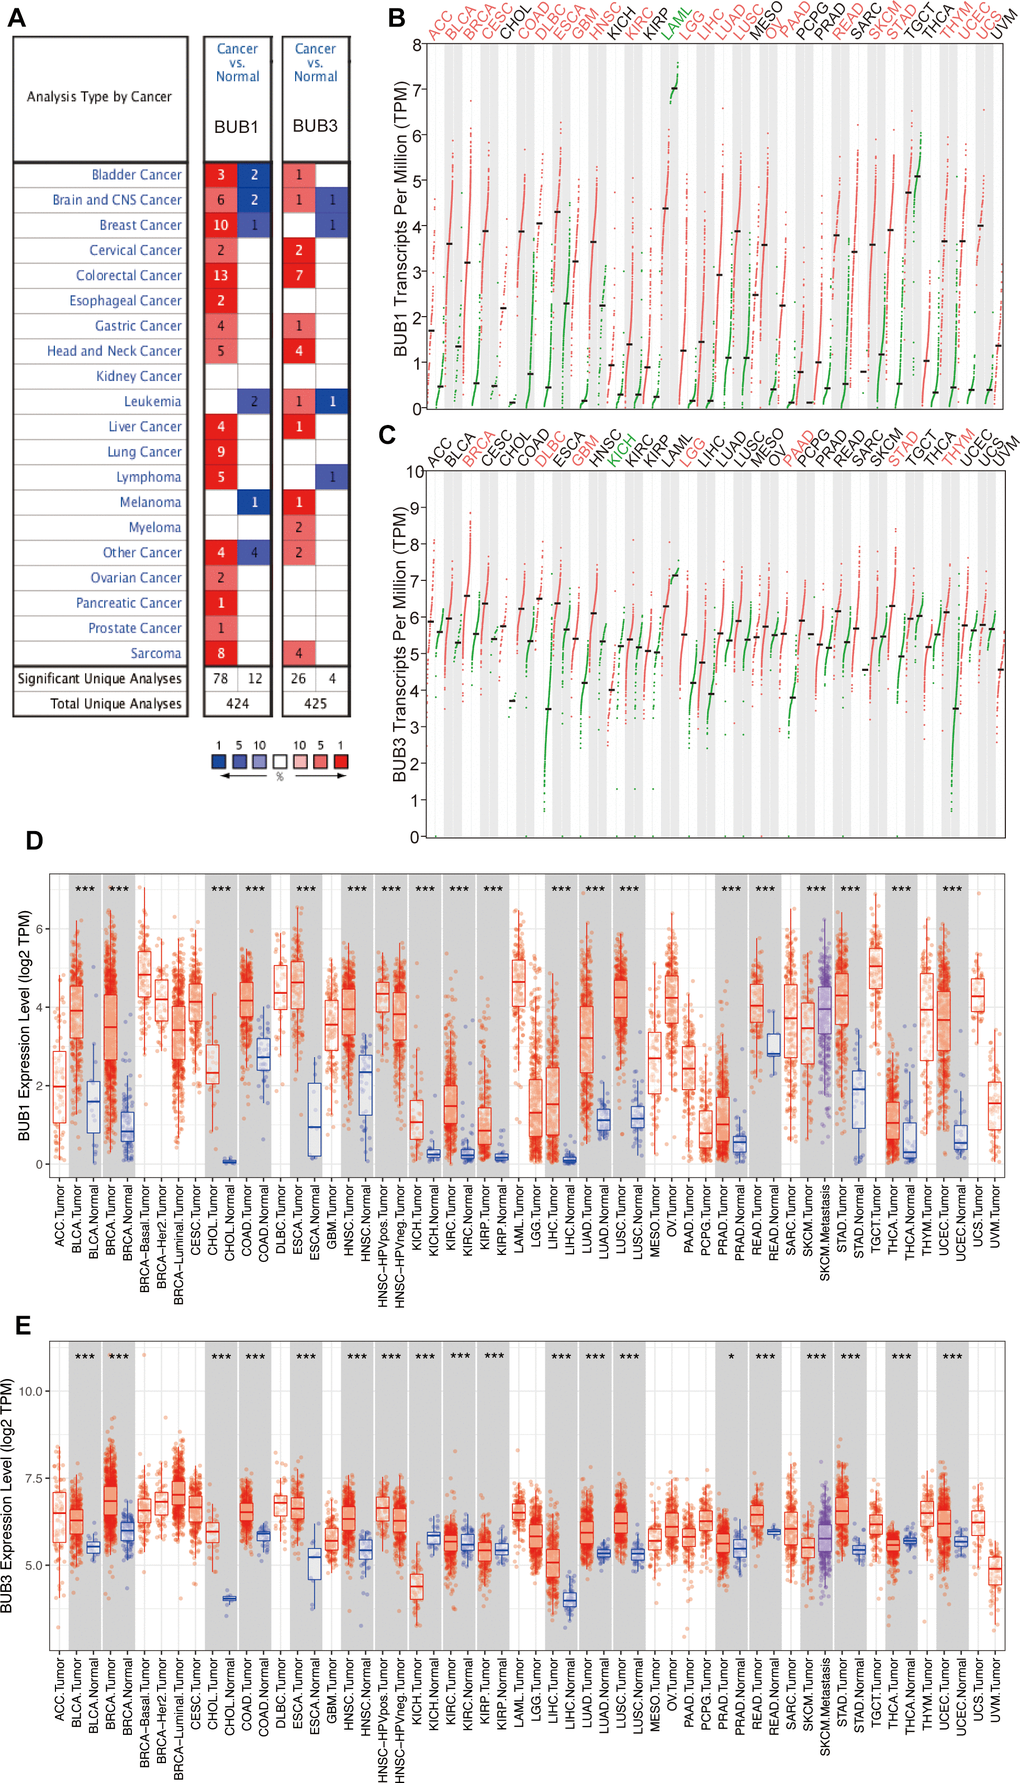 Differential expression of BUB1/3 at transcriptional levels in different cancers. (A) BUB1/3 mRNA expression in 20 different types of cancers analyzed using the data in the Oncomine platform. Red represents high expression levels, and blue represents low expression levels. p B, C) Expression levels of BUB1 (B) and BUB3 (C) mRNAs in 33 cancer tissues and paired normal tissues obtained from the GEPIA database. p  = 2. (D, E) Expressions levels of BUB1 (D) and BUB3 (E) in cancer tissues and the corresponding normal tissues obtained from the TIMER database. Red, cancerous tissue; Blue, normal tissue. *, p p p 